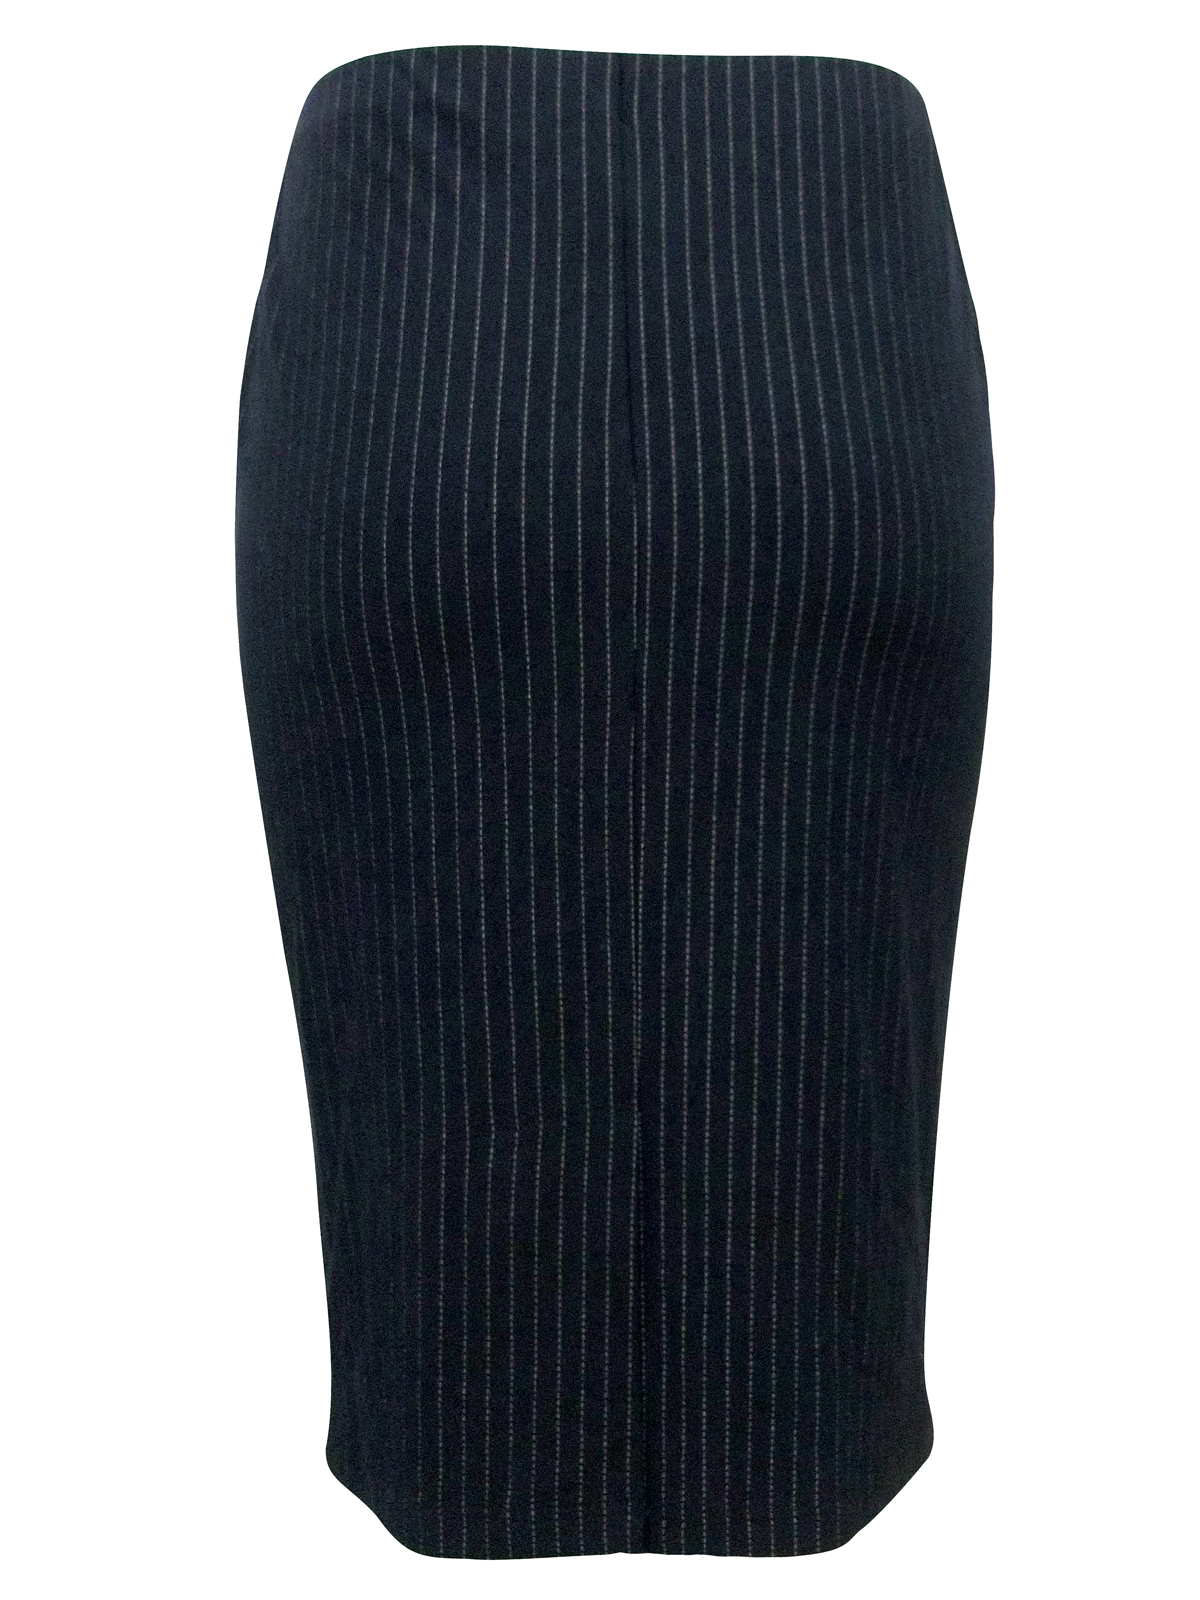 Marks and Spencer - - M&5 BLACK Pinstripe Pencil Skirt - Size 8